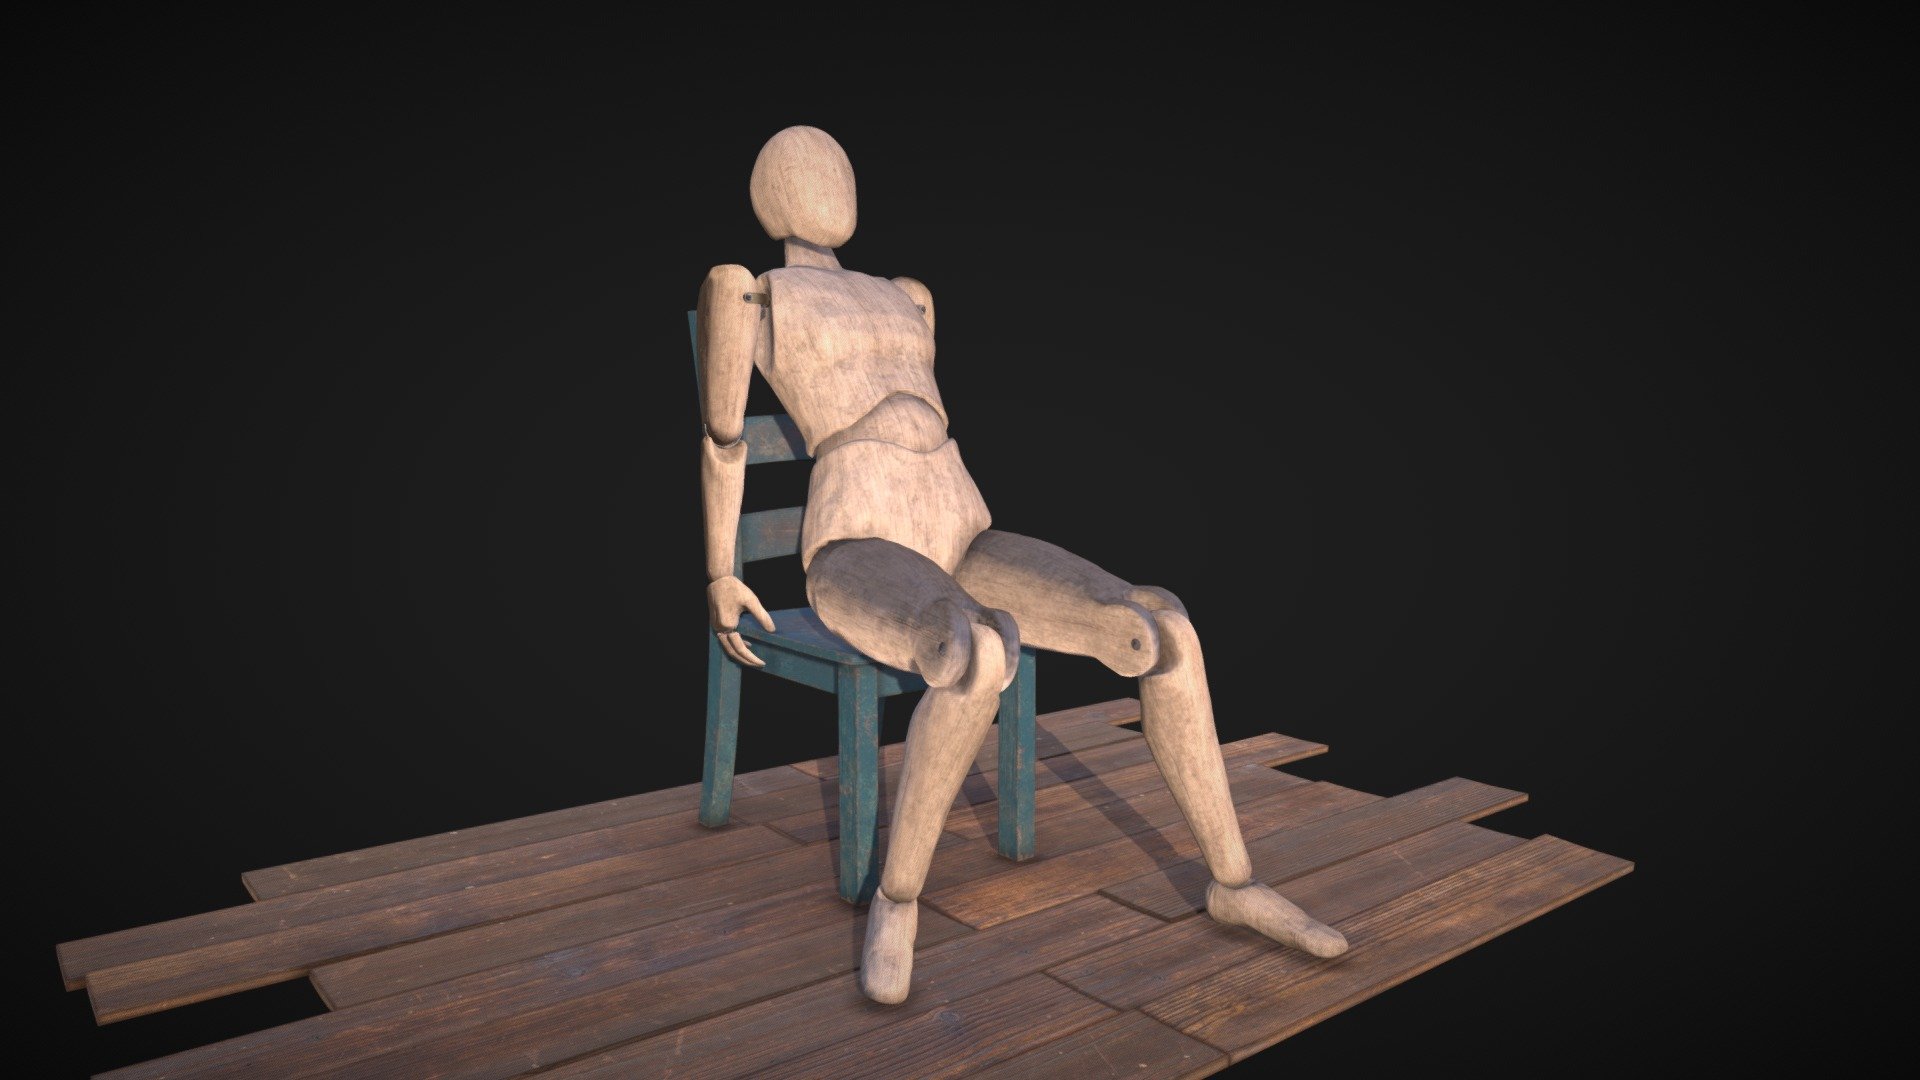 Another wooden doll creation. Just for fun and to help me practice lighting and animation stuff.

You can find renders of this asset here: https://www.artstation.com/artwork/OmEzyb - Wooden Mannequin on chair - 3D model by DudleyLong 3d model